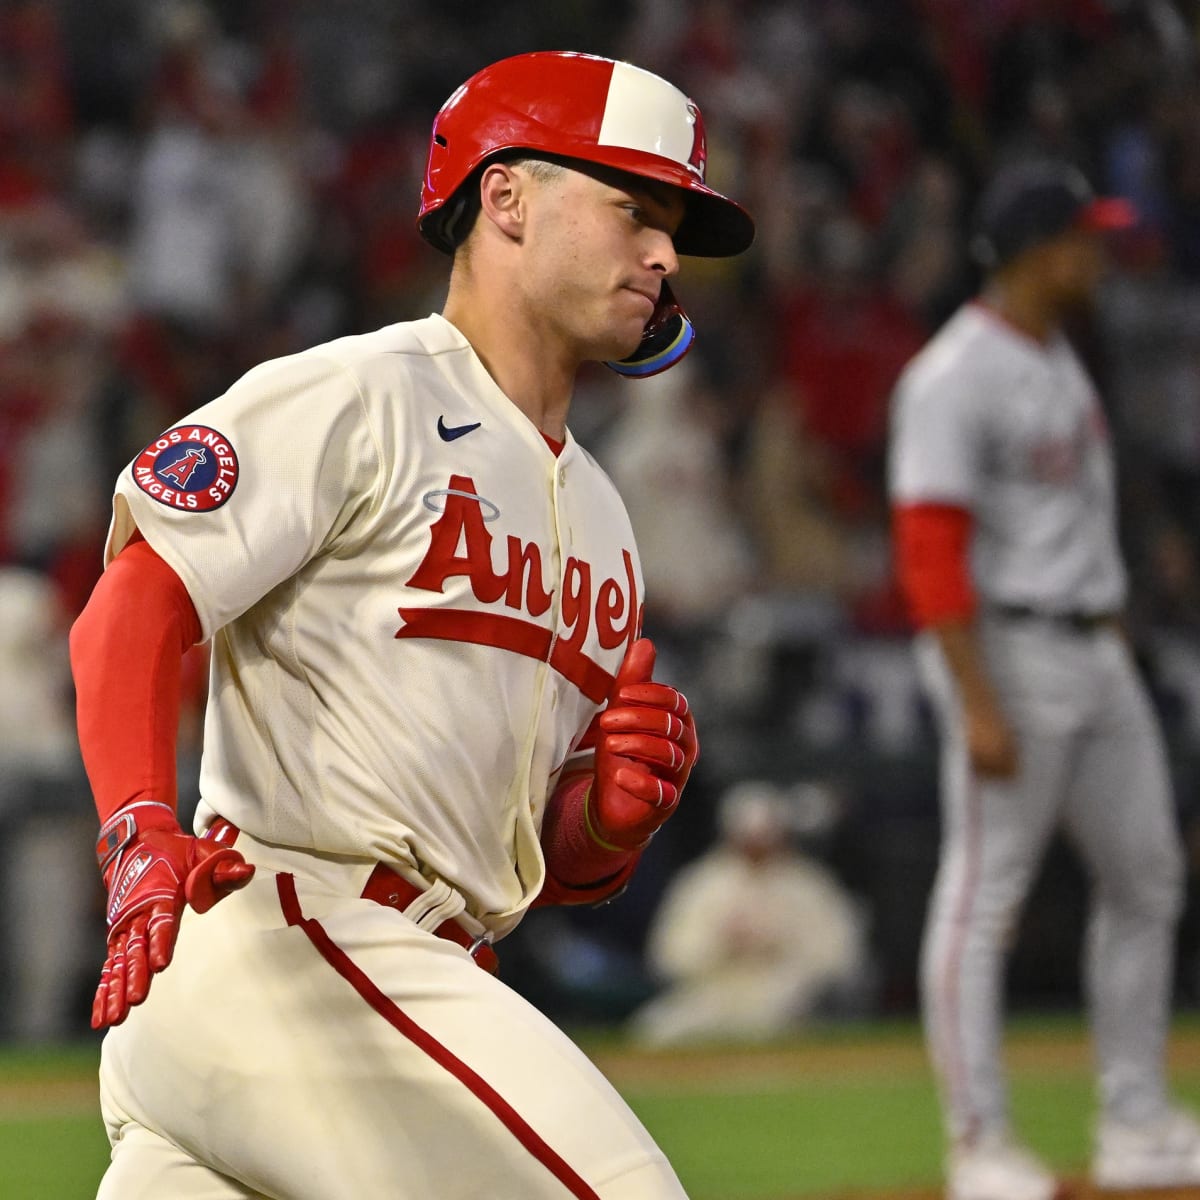 Logan O'Hoppe issues heartfelt message to Angels fans after surgery